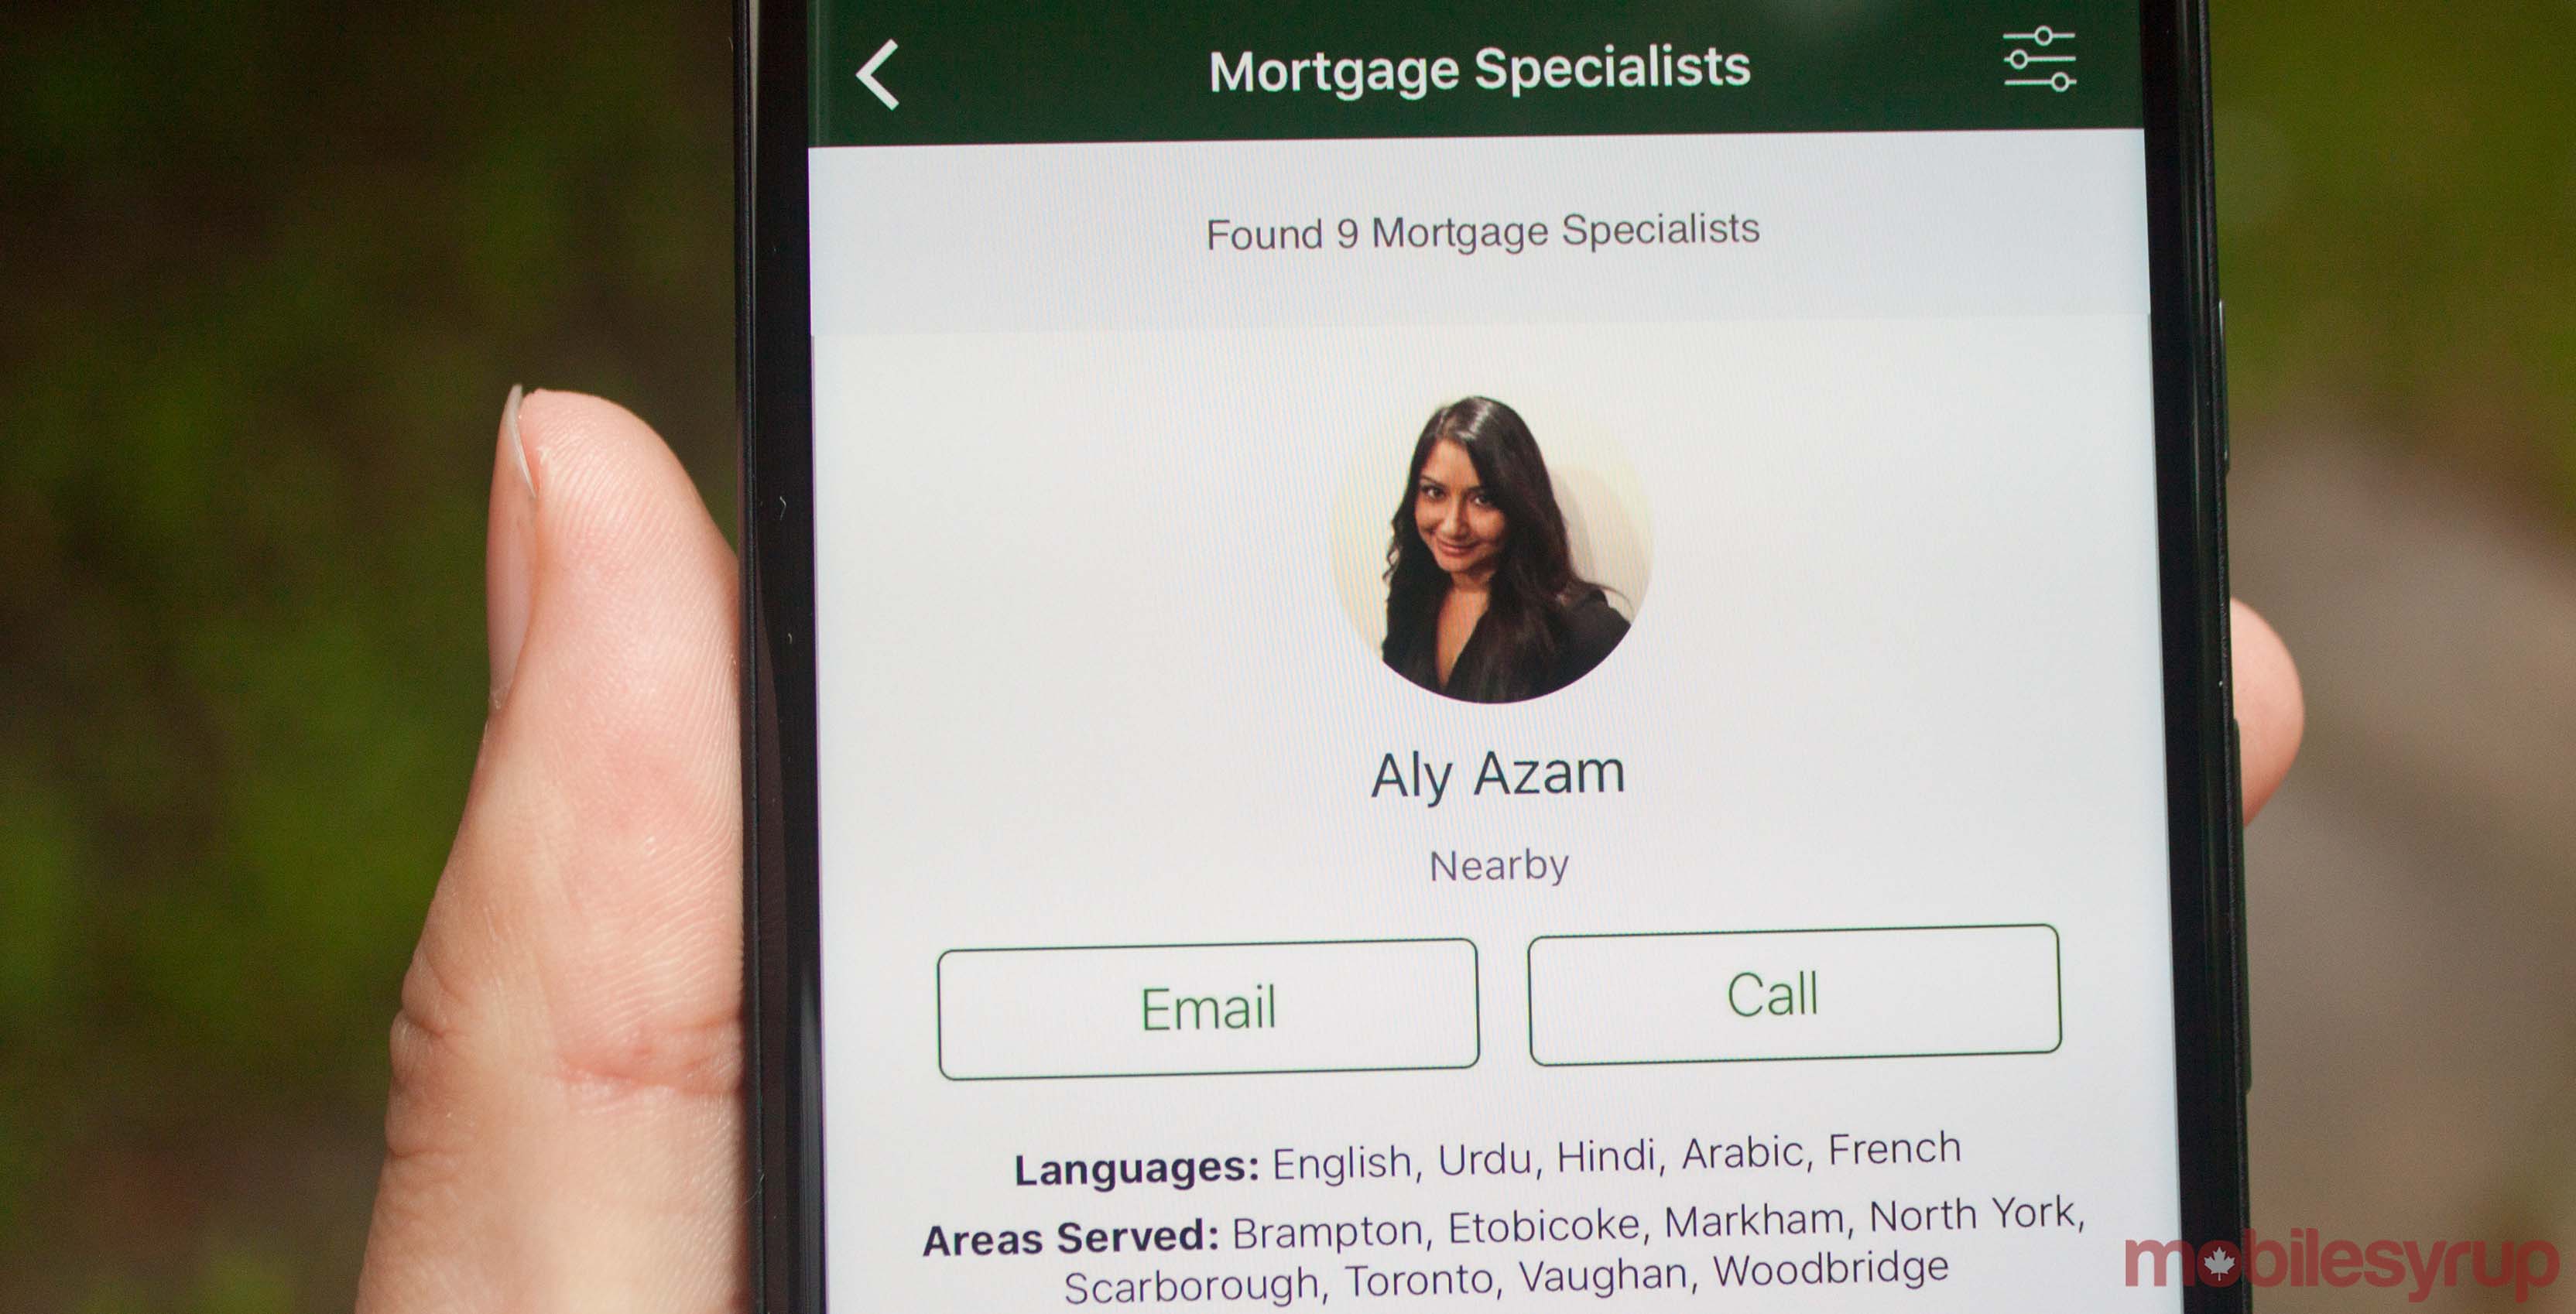 TD Mortgage Specialist connection